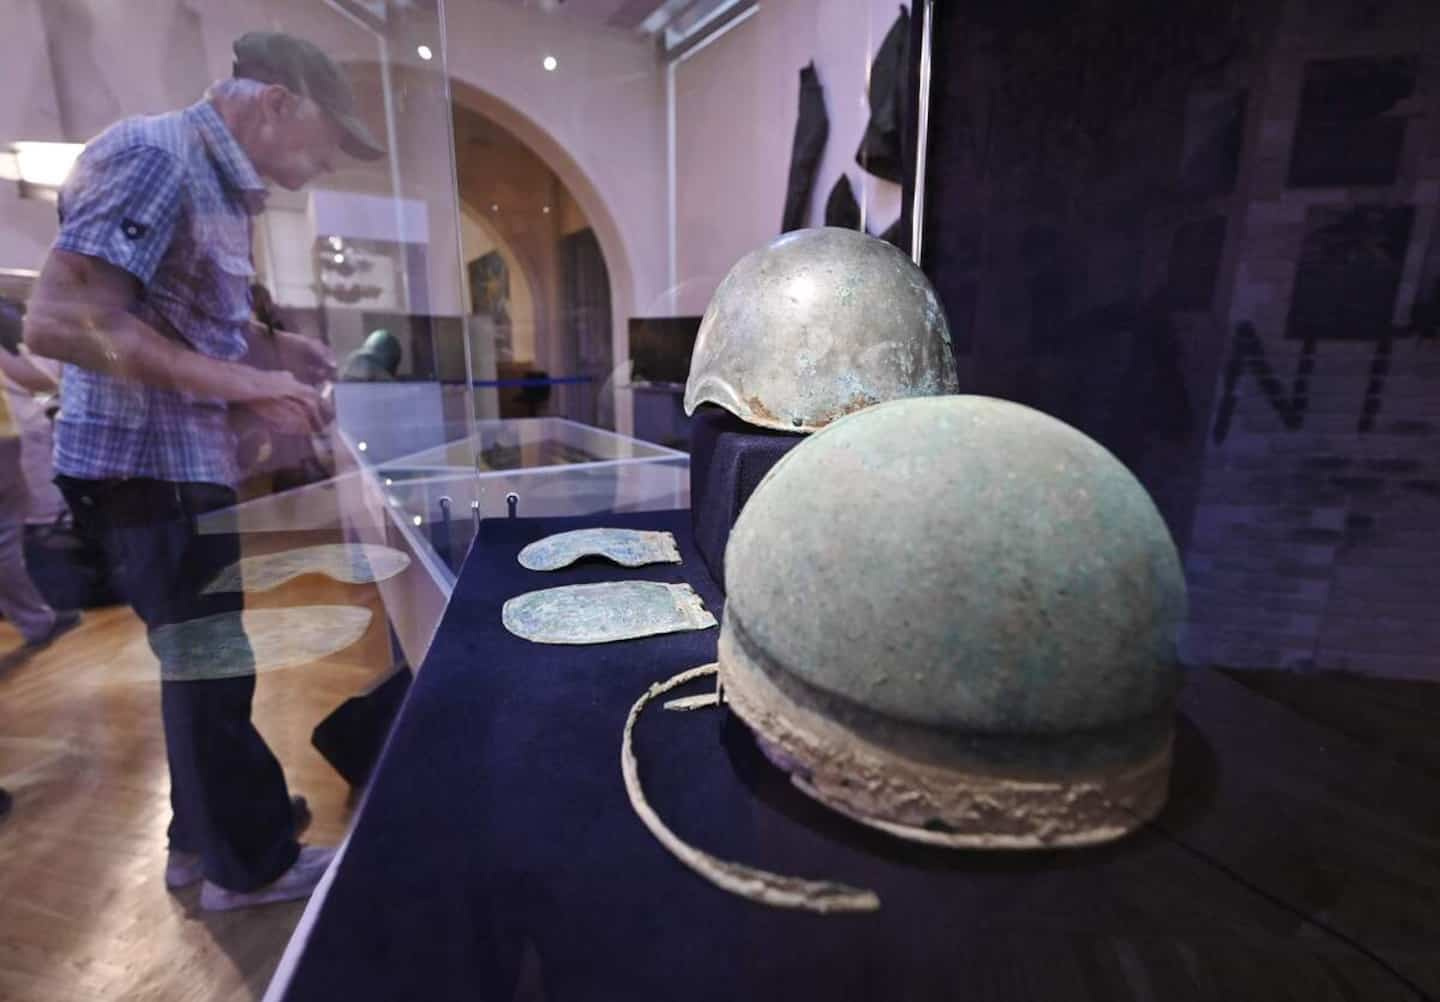 Ukraine seizes 'largest' collection of antiquities in its history